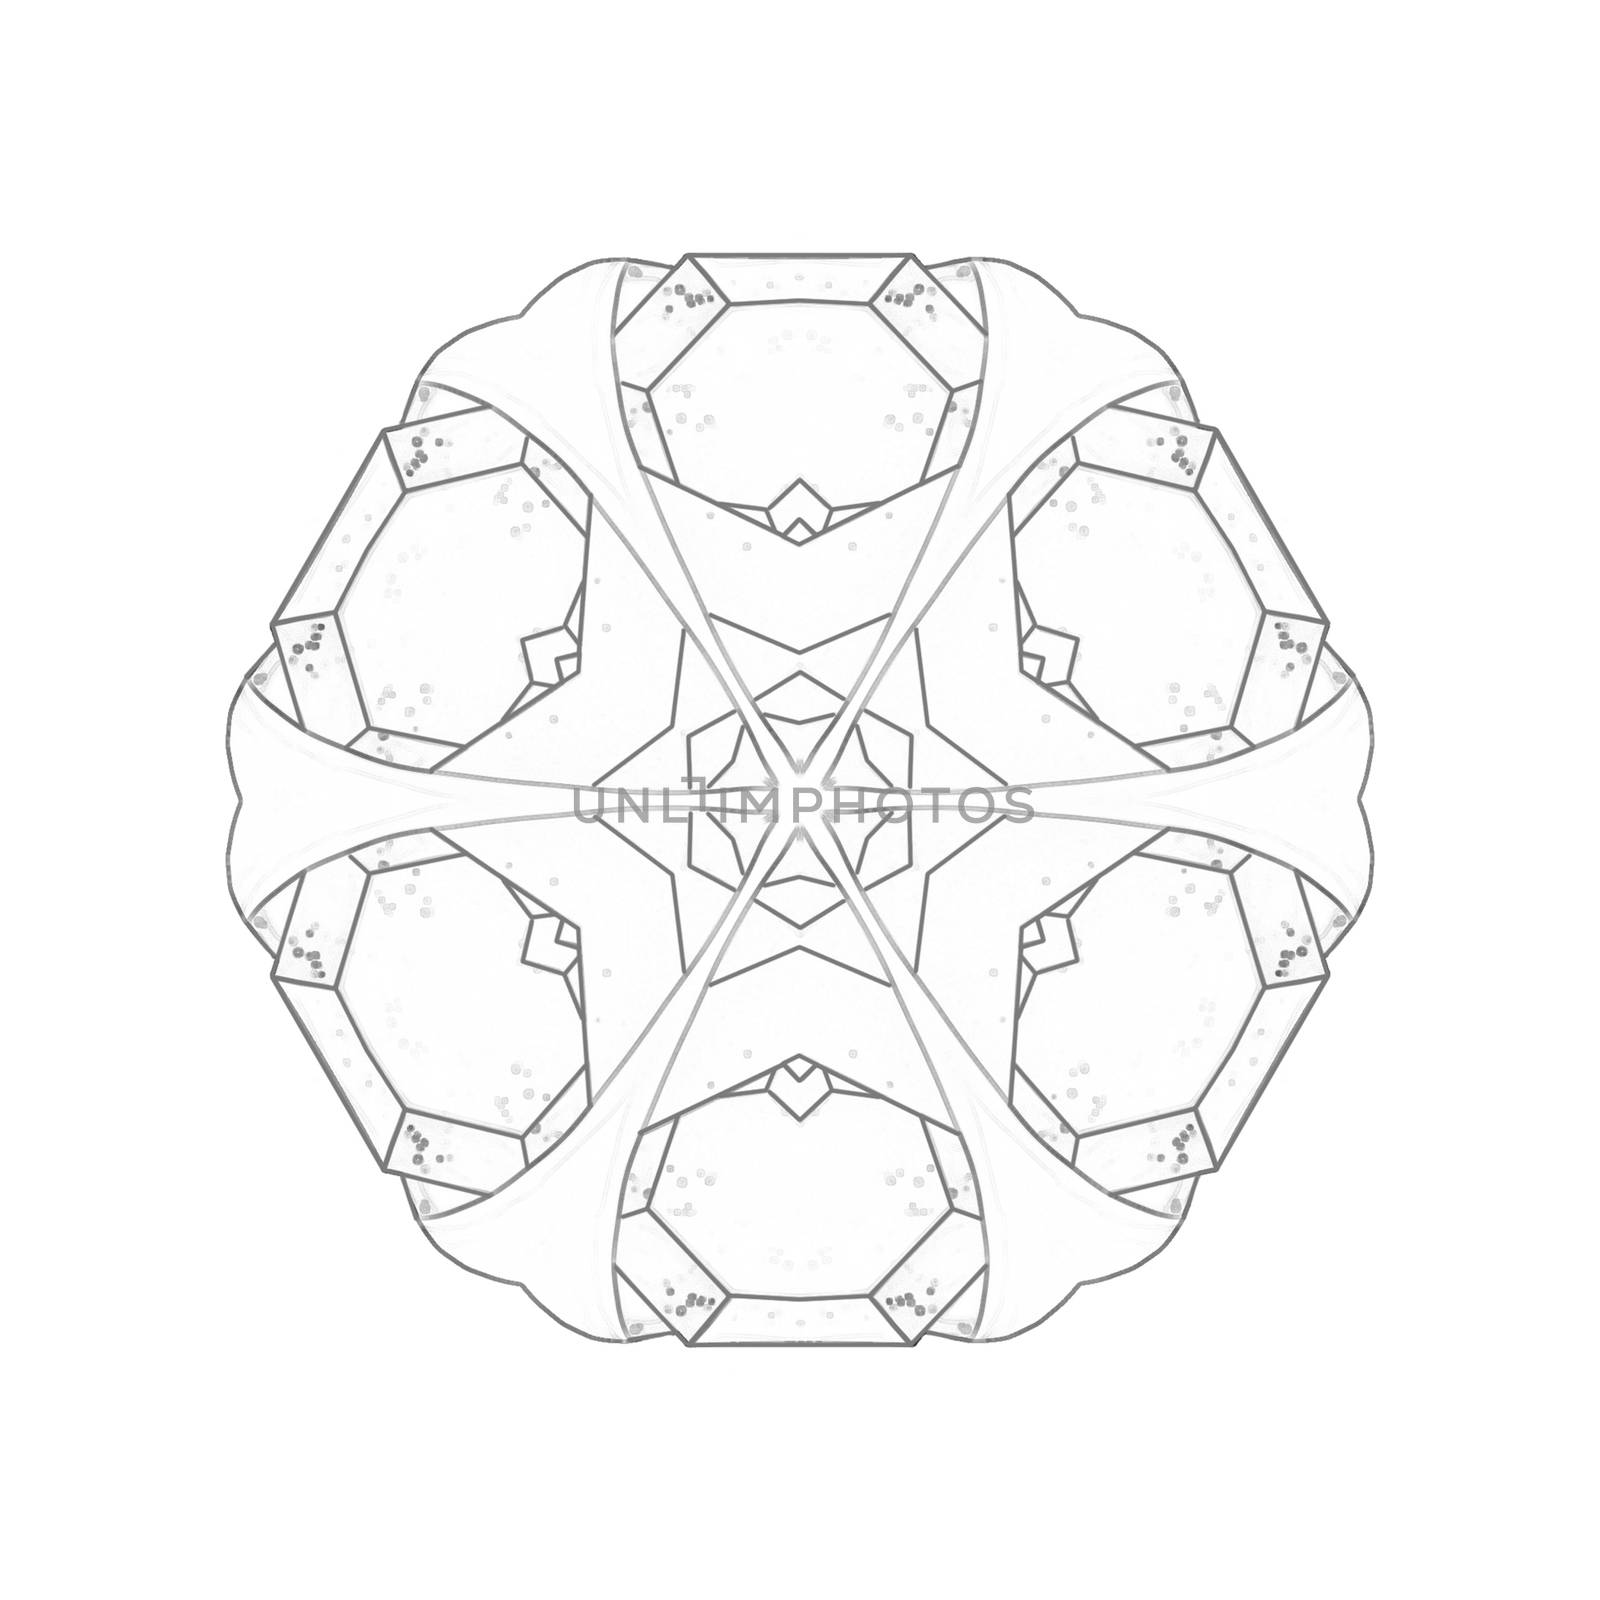 Illustration: Coloring Book Series: Pack of Diamonds Flower. Soft line. Print it and bring it to Life with Color! Fantastic Outline / Sketch / Line Art Design.